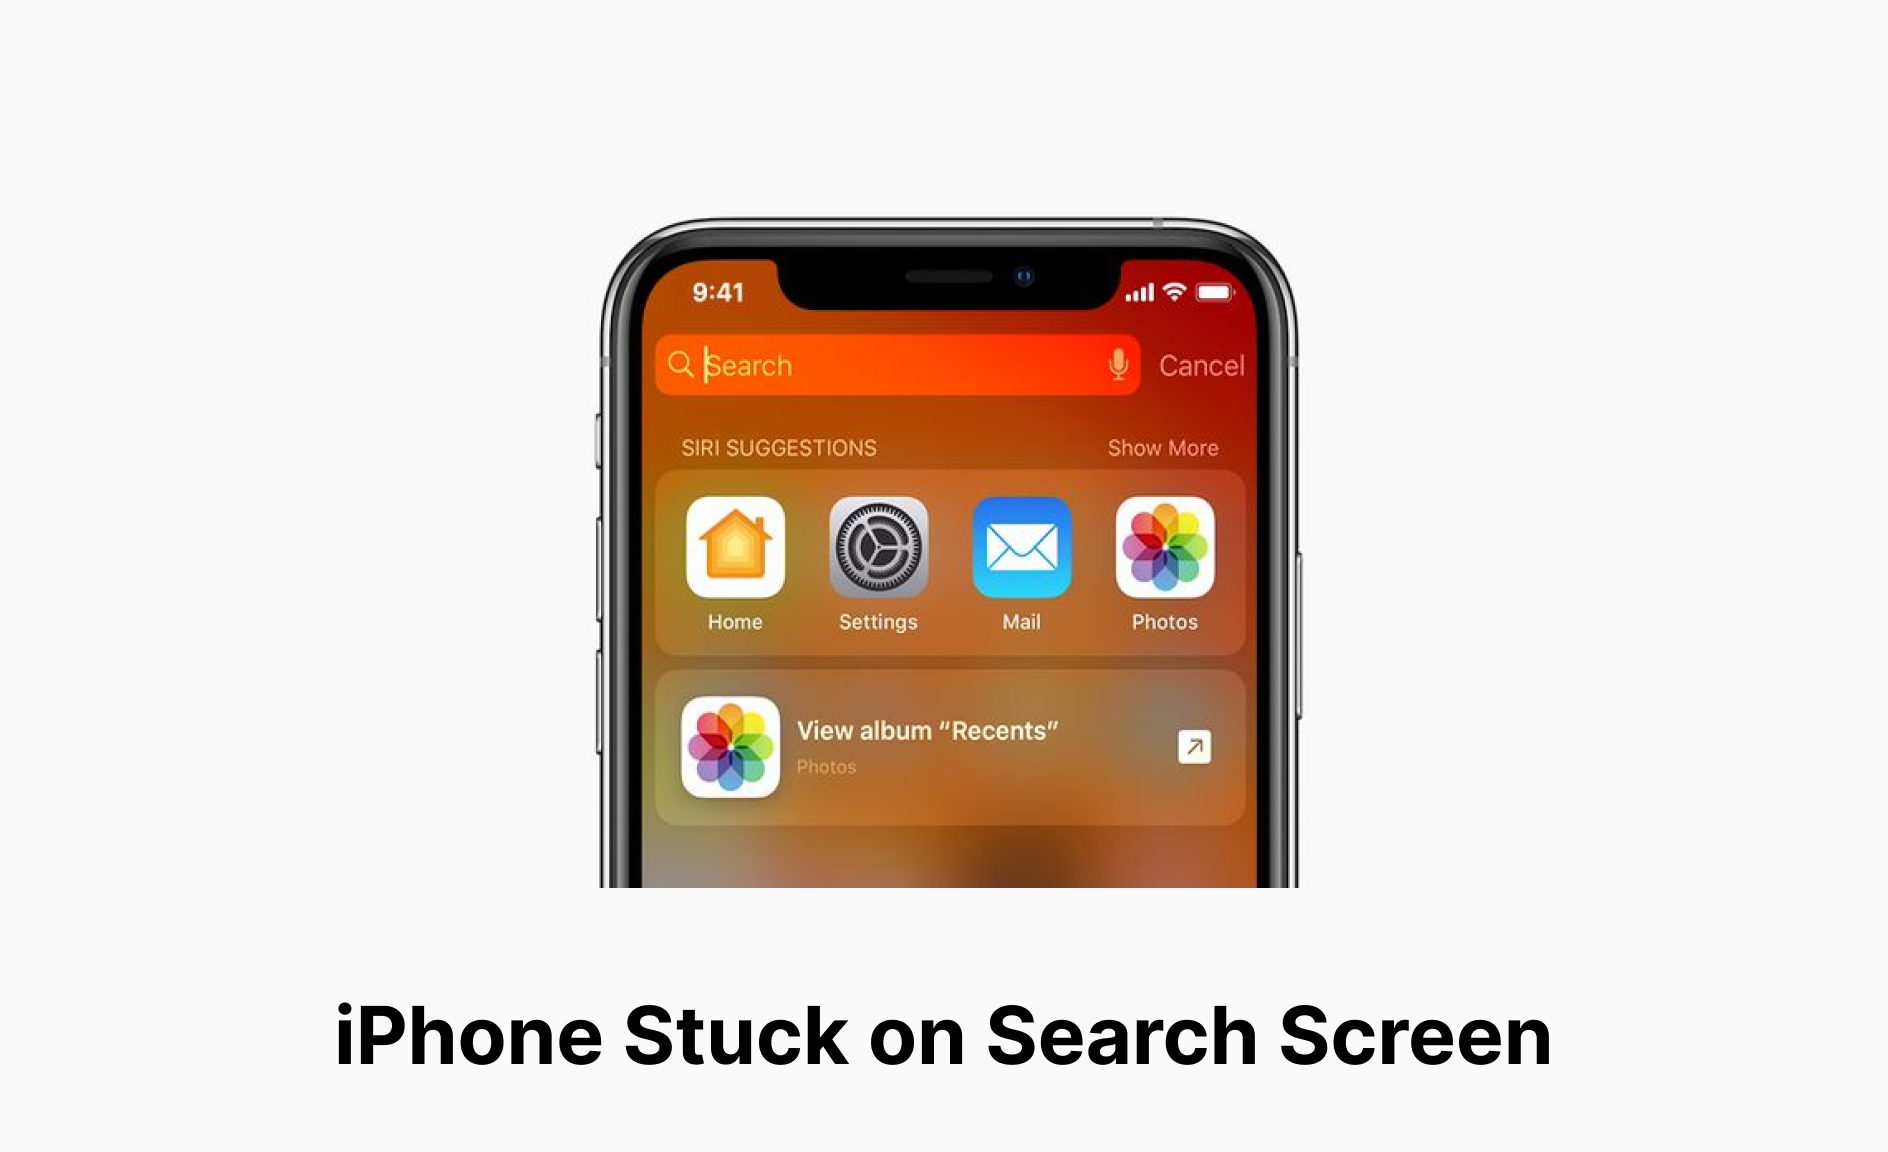 iPhone Stuck on Search Screen? Here's the Best Way to Fix It